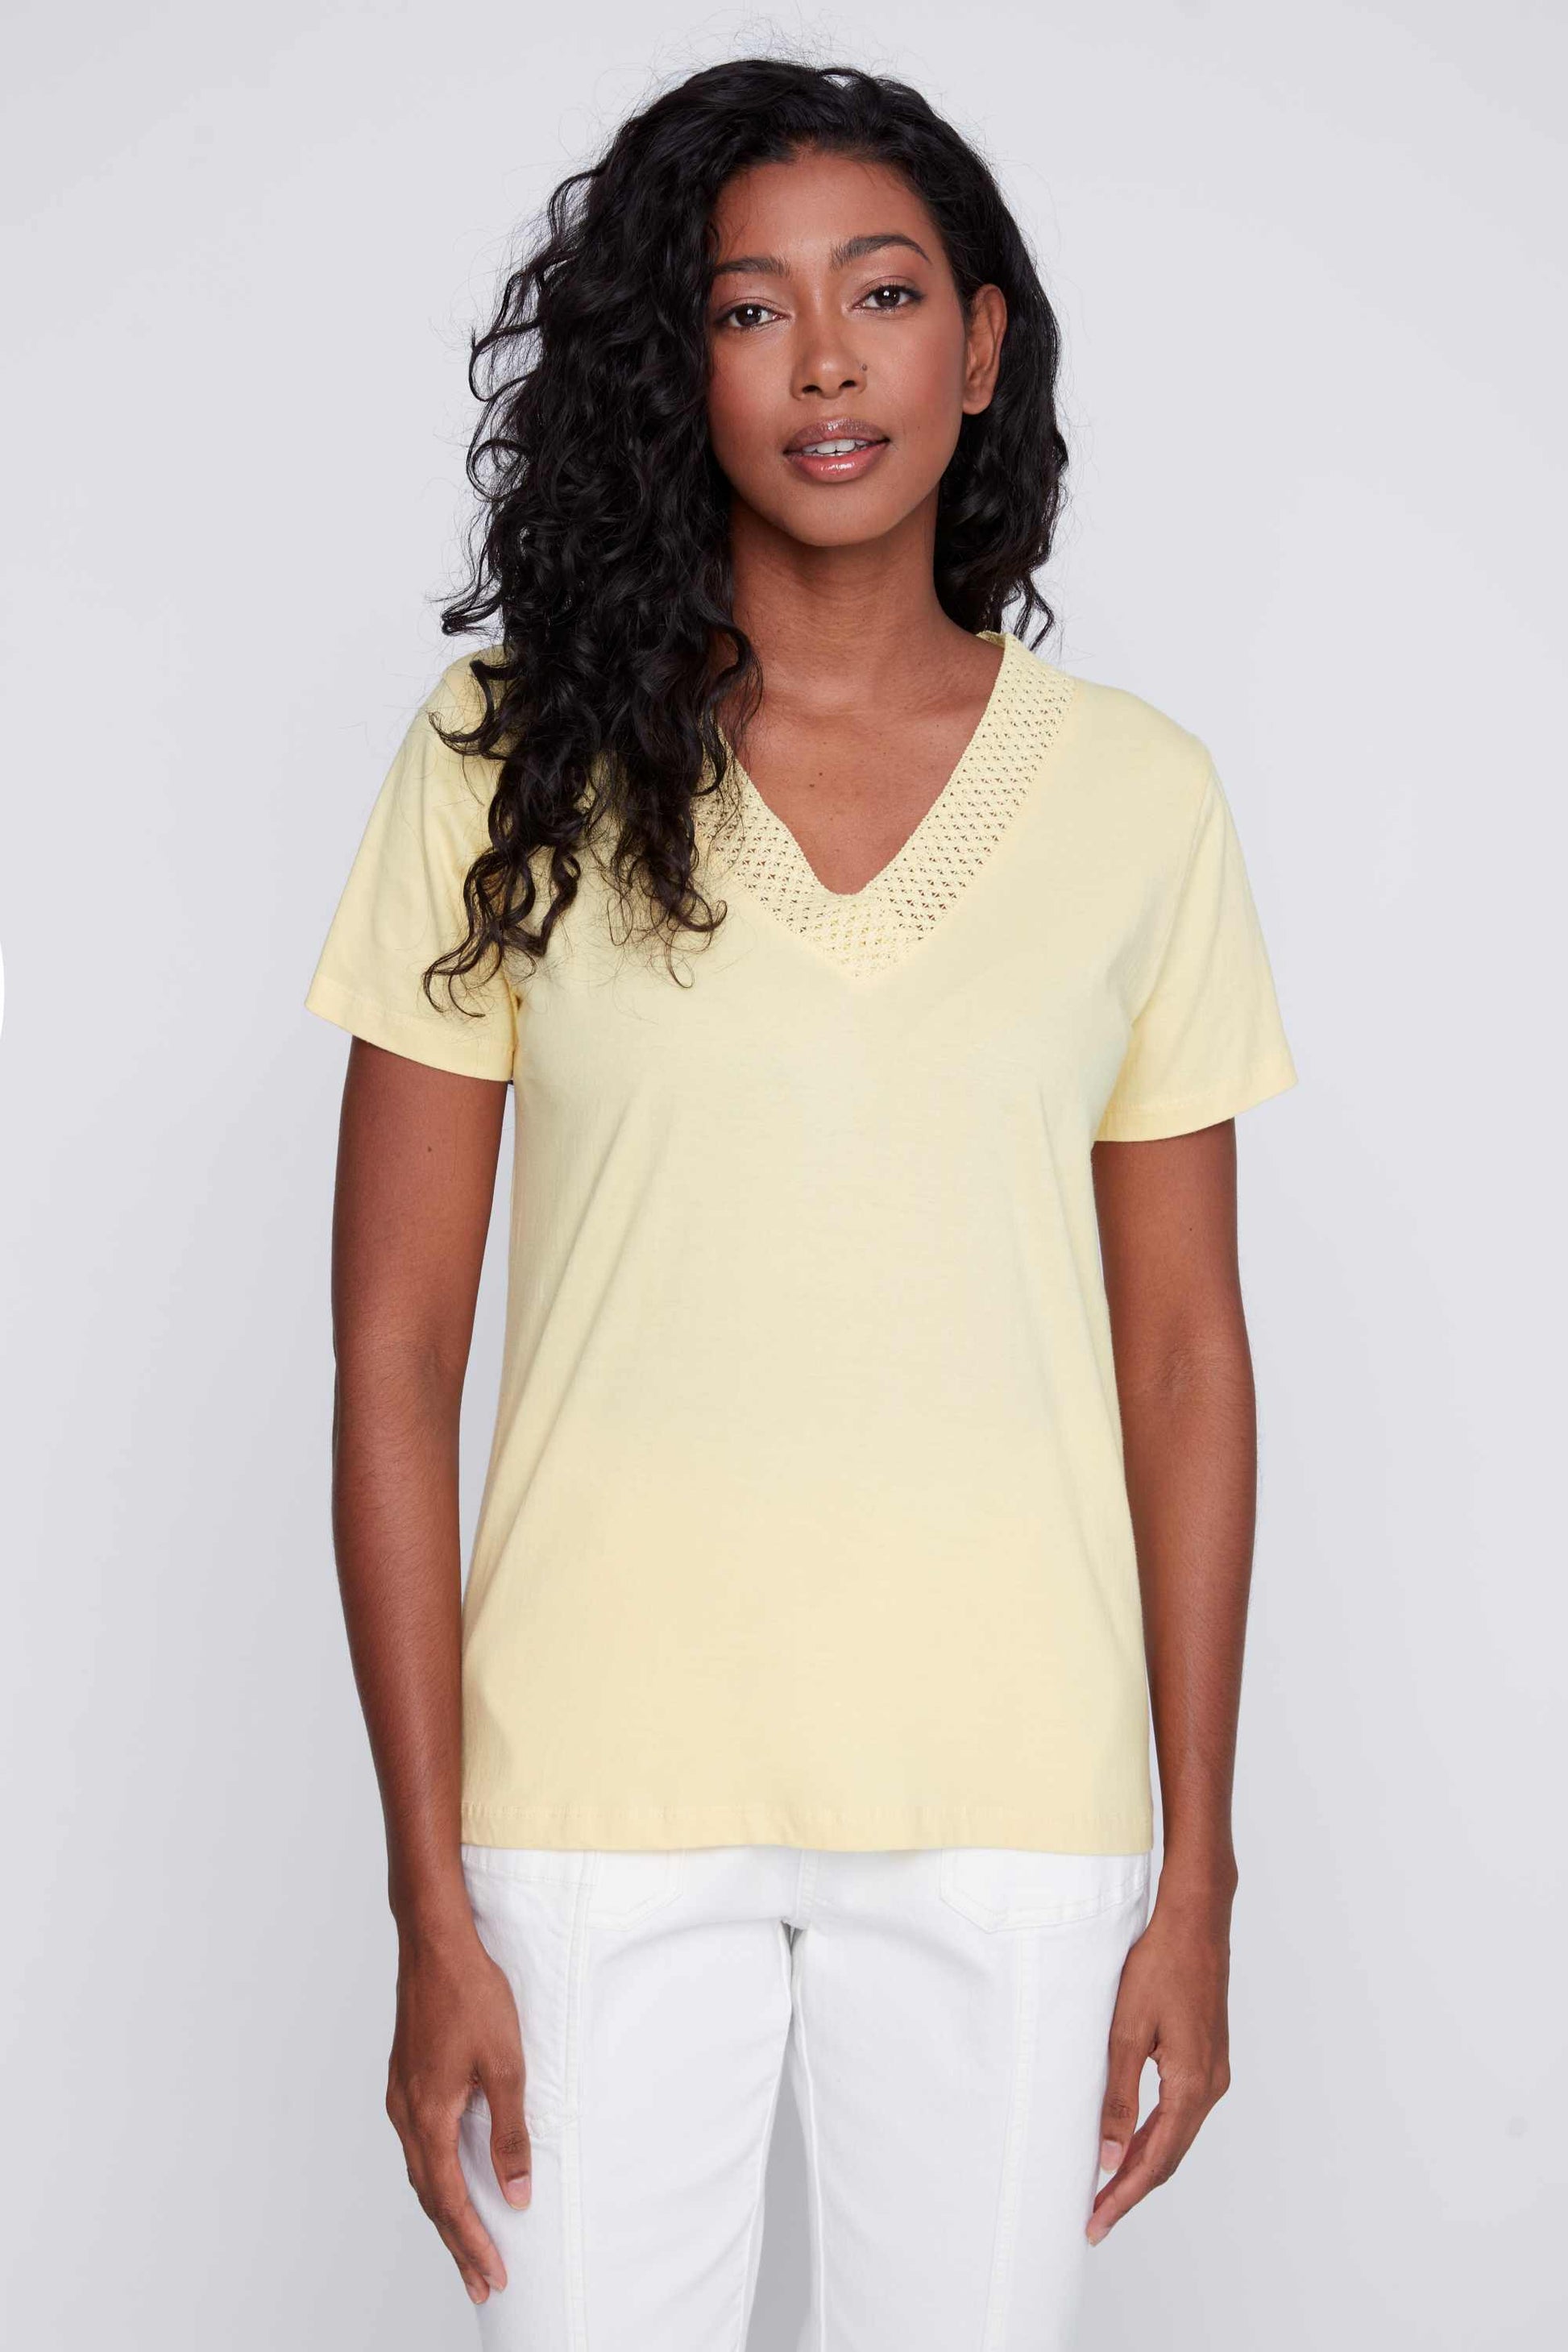 Woman in a white CoCo Y Club mesh detailed v-neck top and yellow pants posing against a gray background, exuding a fashion-forward vibe.